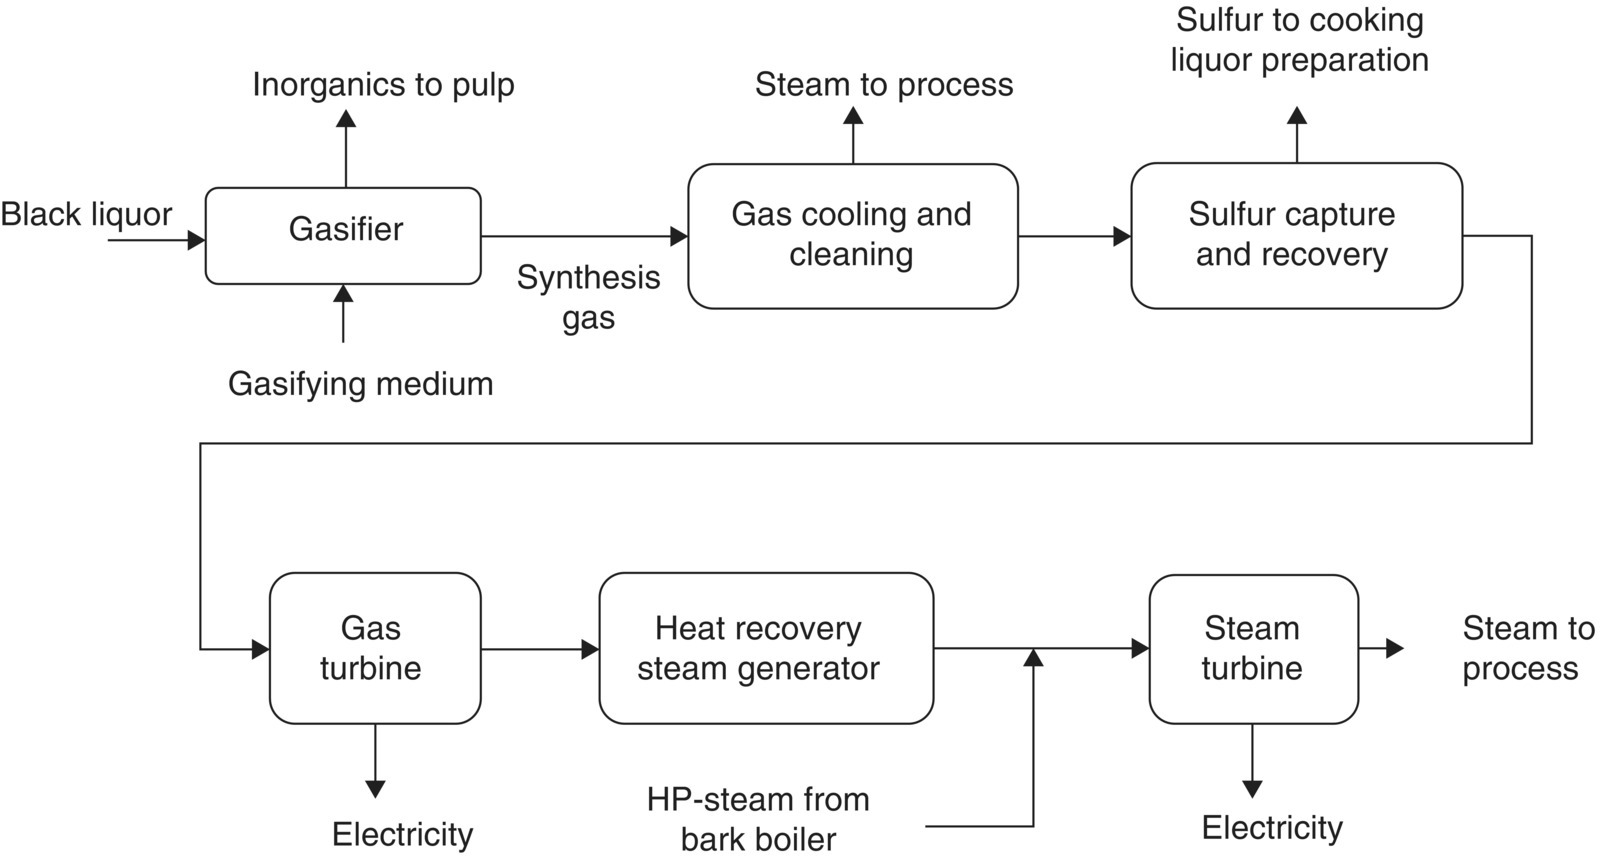 Flow diagram of power/recovery system in pulp mill BLGCC, with arrows from gasifier to gas cooling and cleaning, to sulfur capture and recovery, to gas turbine, to heat recovery steam generator, then to steam turbine.